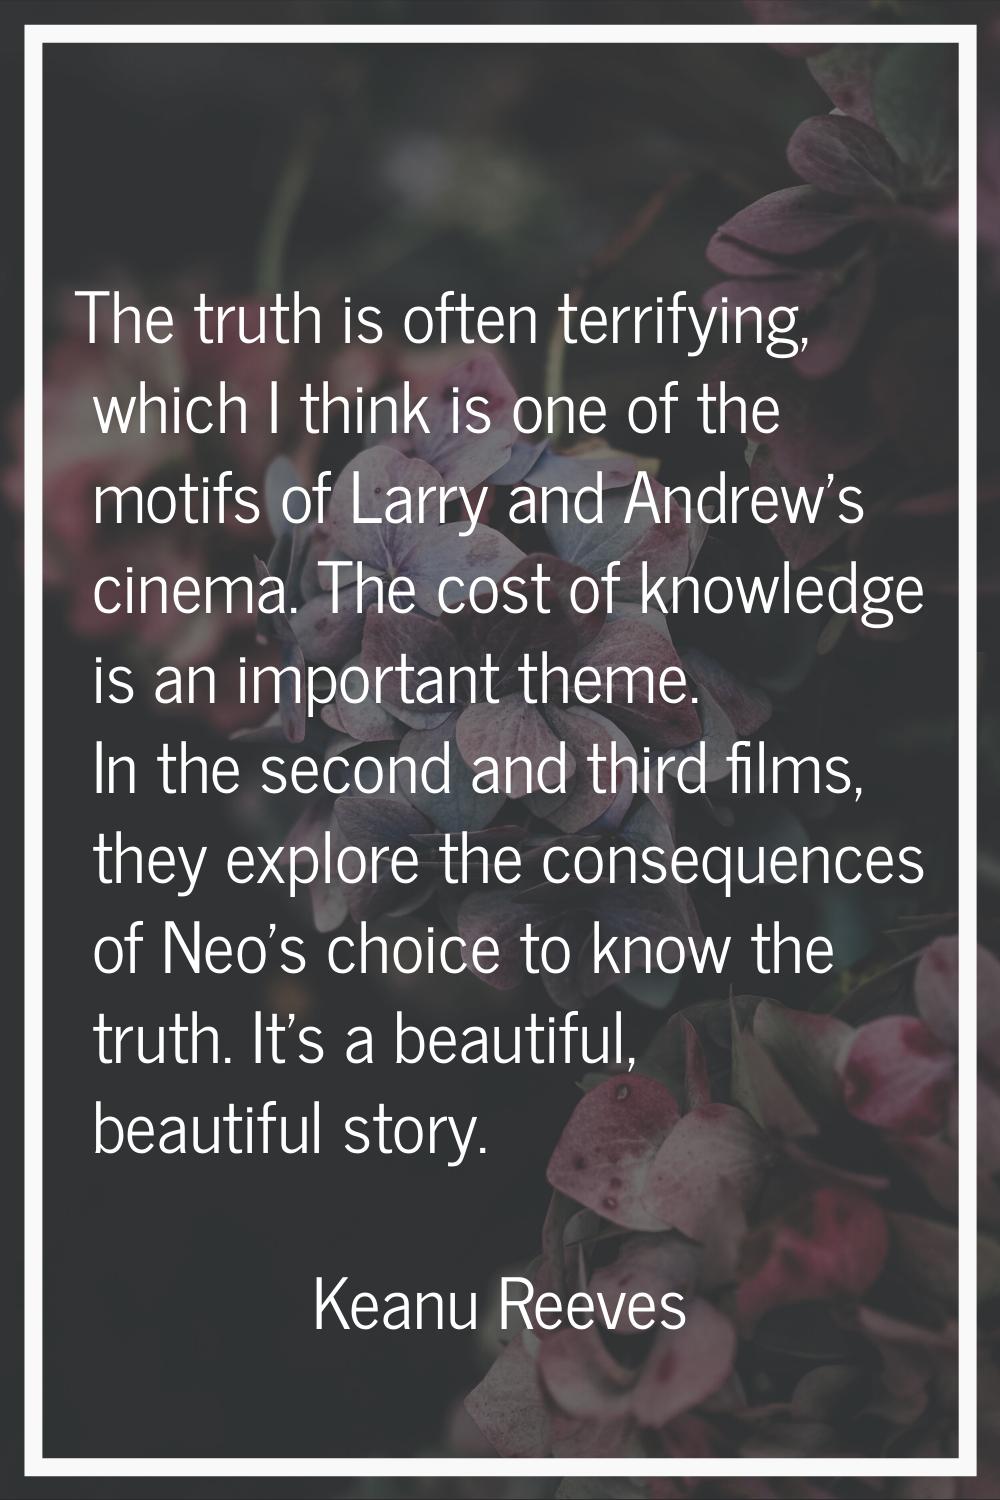 The truth is often terrifying, which I think is one of the motifs of Larry and Andrew's cinema. The